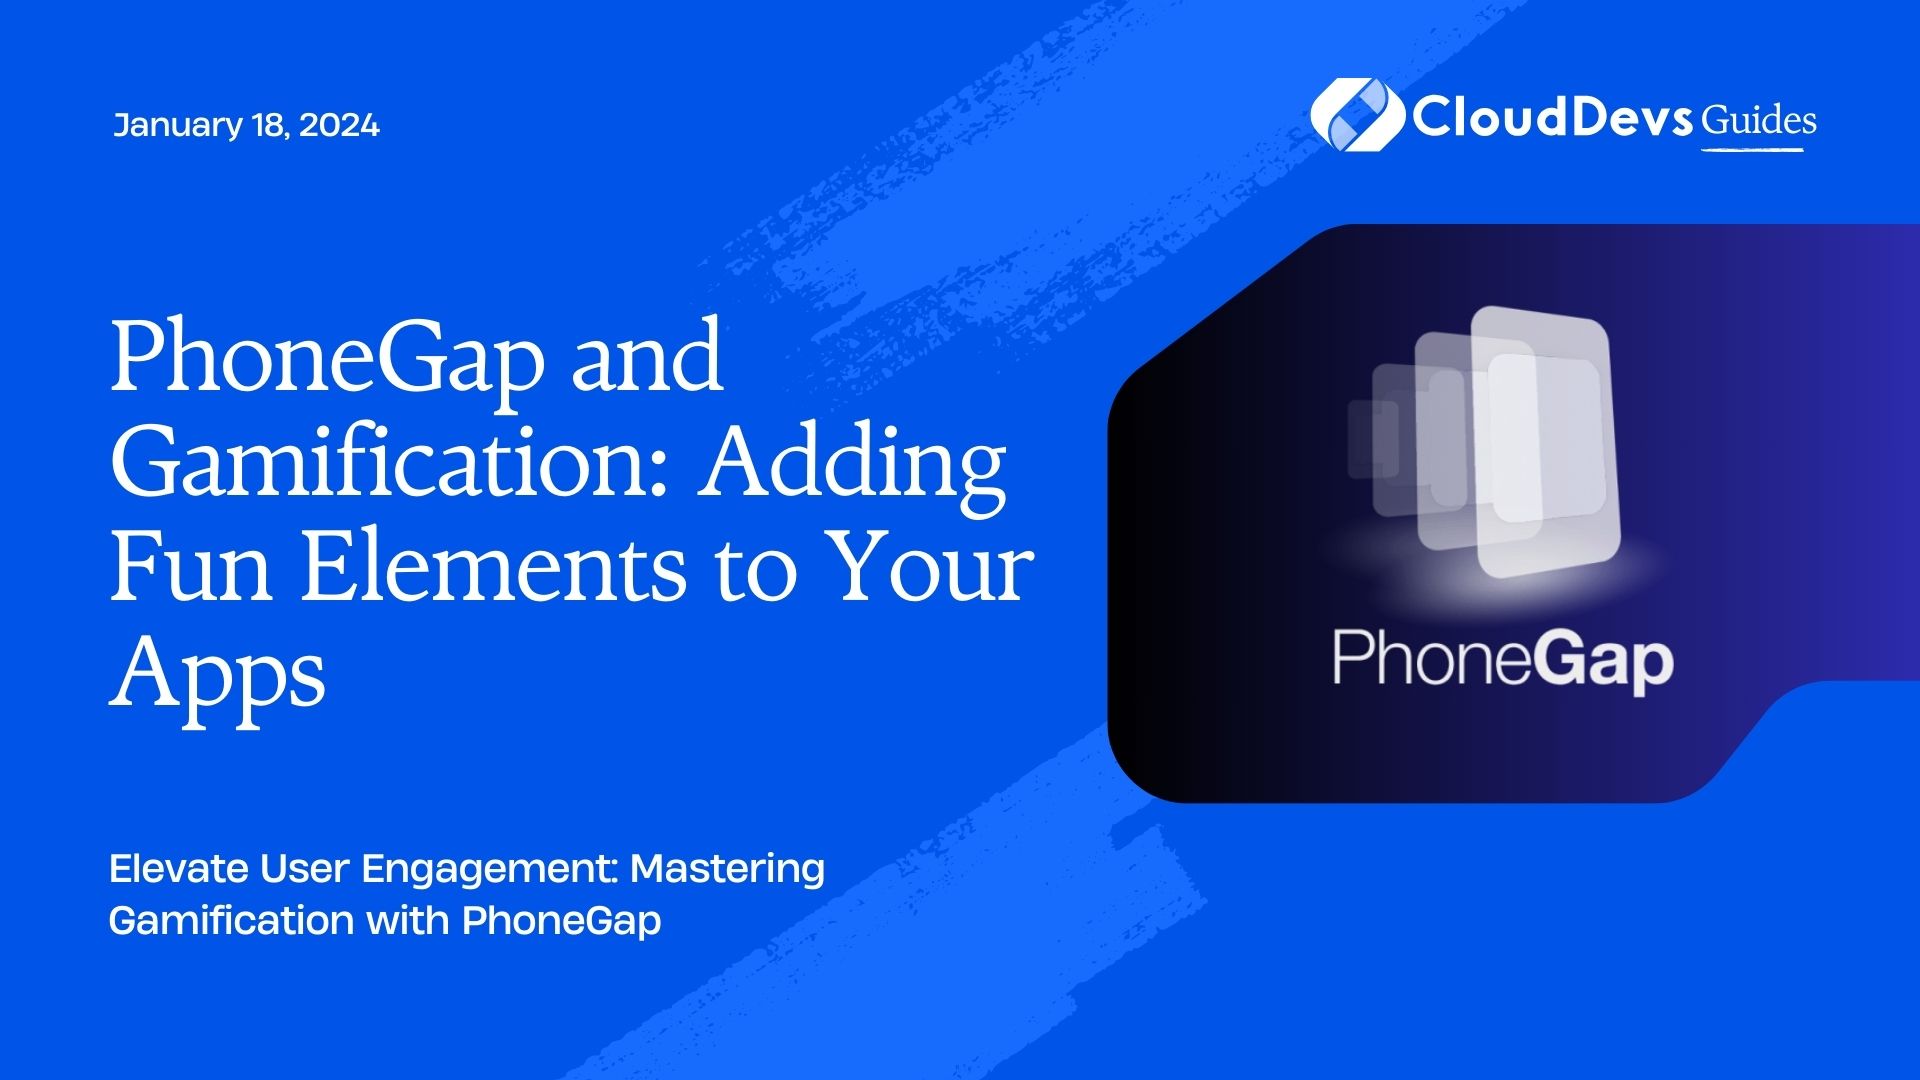 PhoneGap and Gamification: Adding Fun Elements to Your Apps